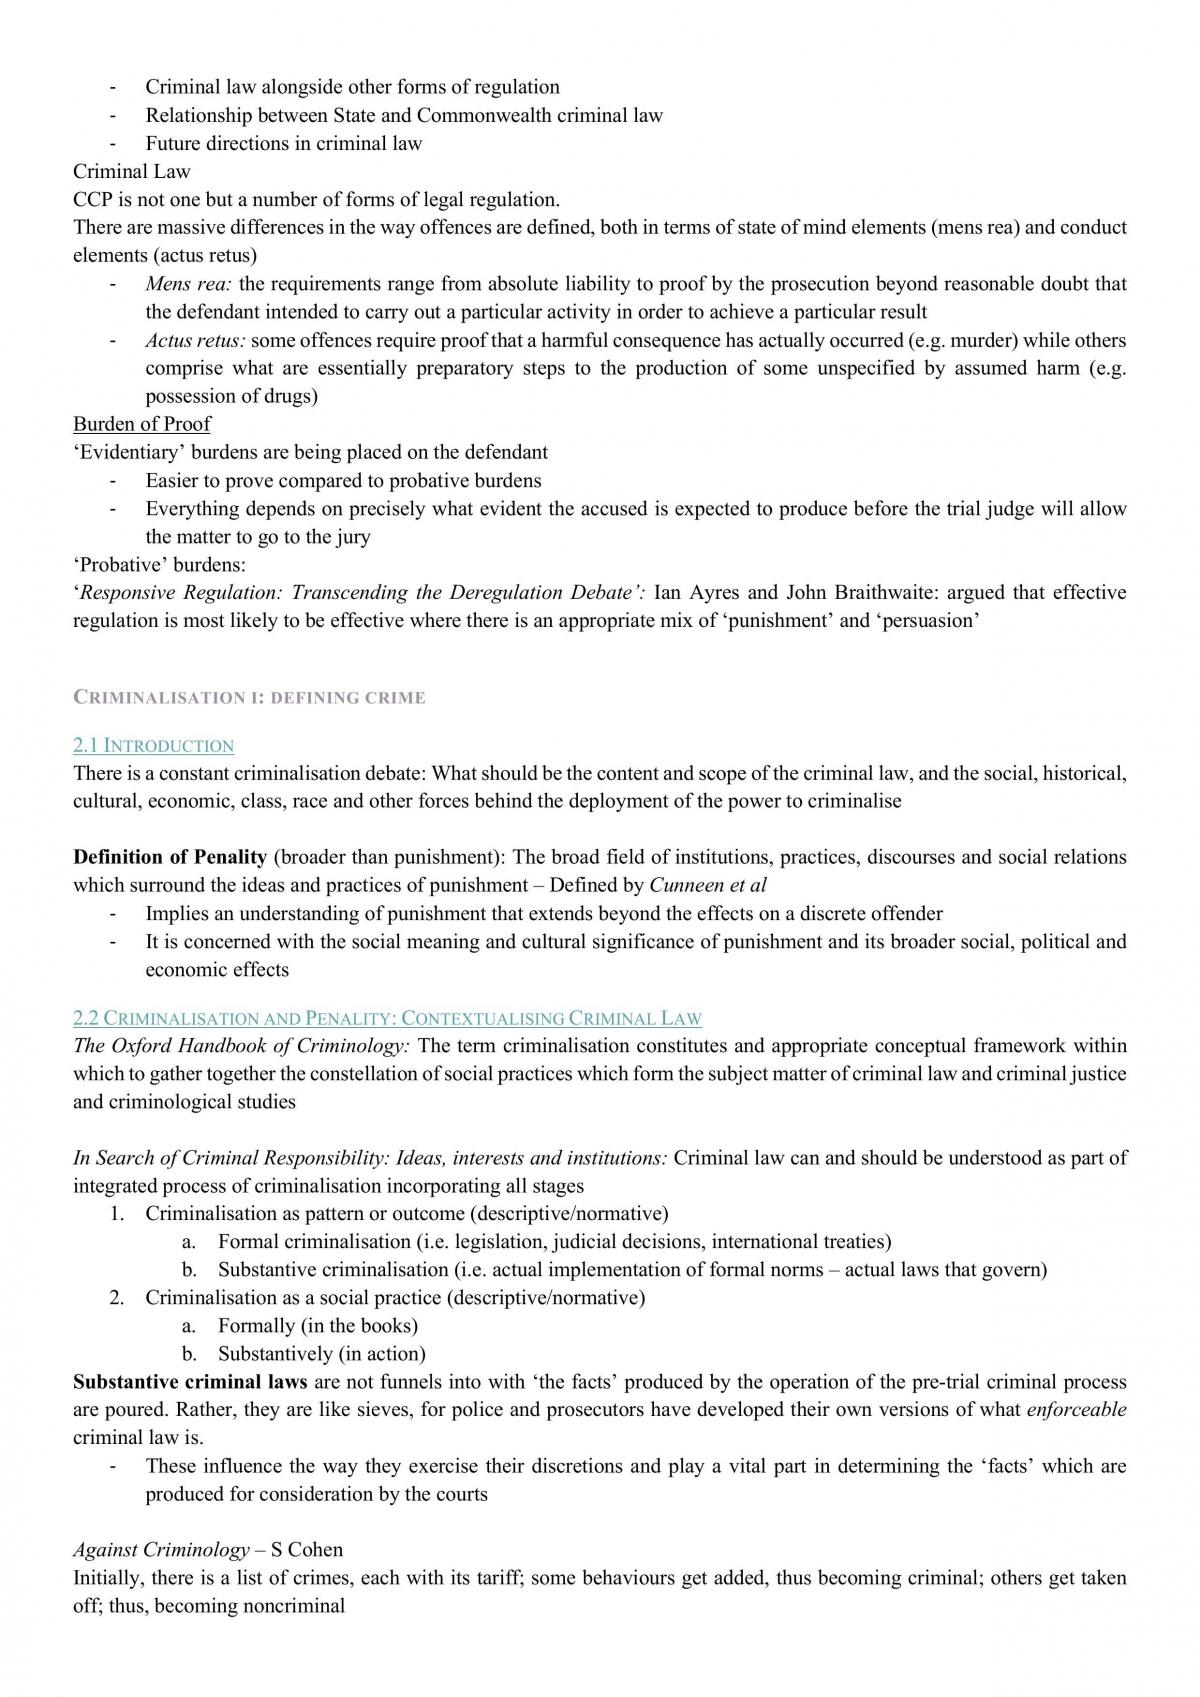 LAWS1021 Complete Study Notes  - Page 4